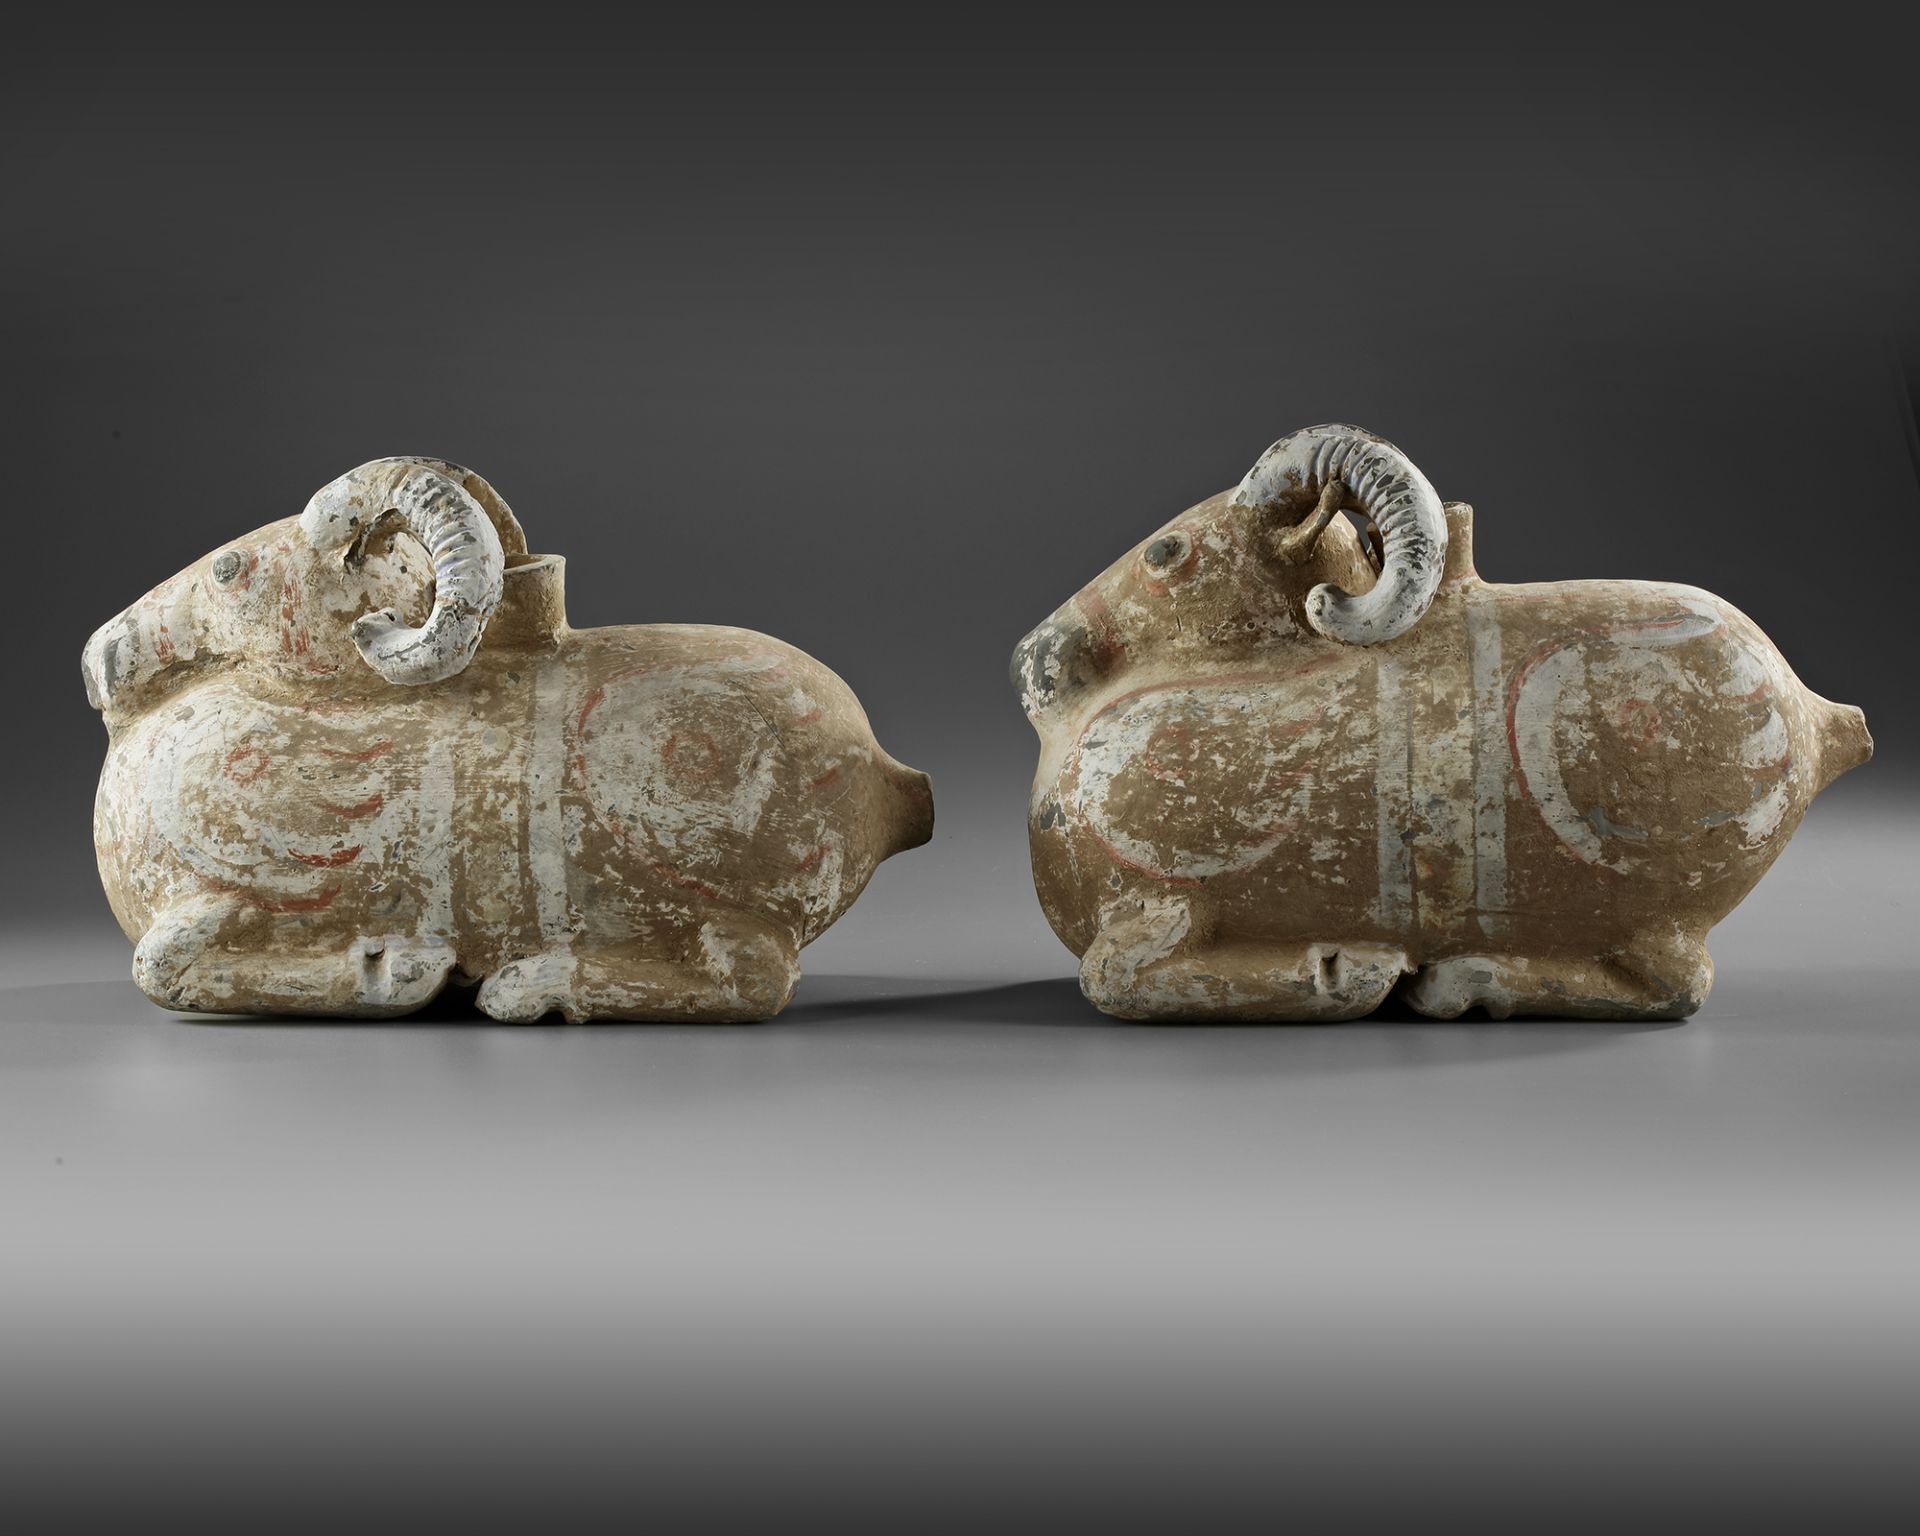 A PAIR OF TERRACOTTA VESSELS IN THE FORM OF A RAM, HAN DYNASTY (206 BC-220 AD) - Image 3 of 6